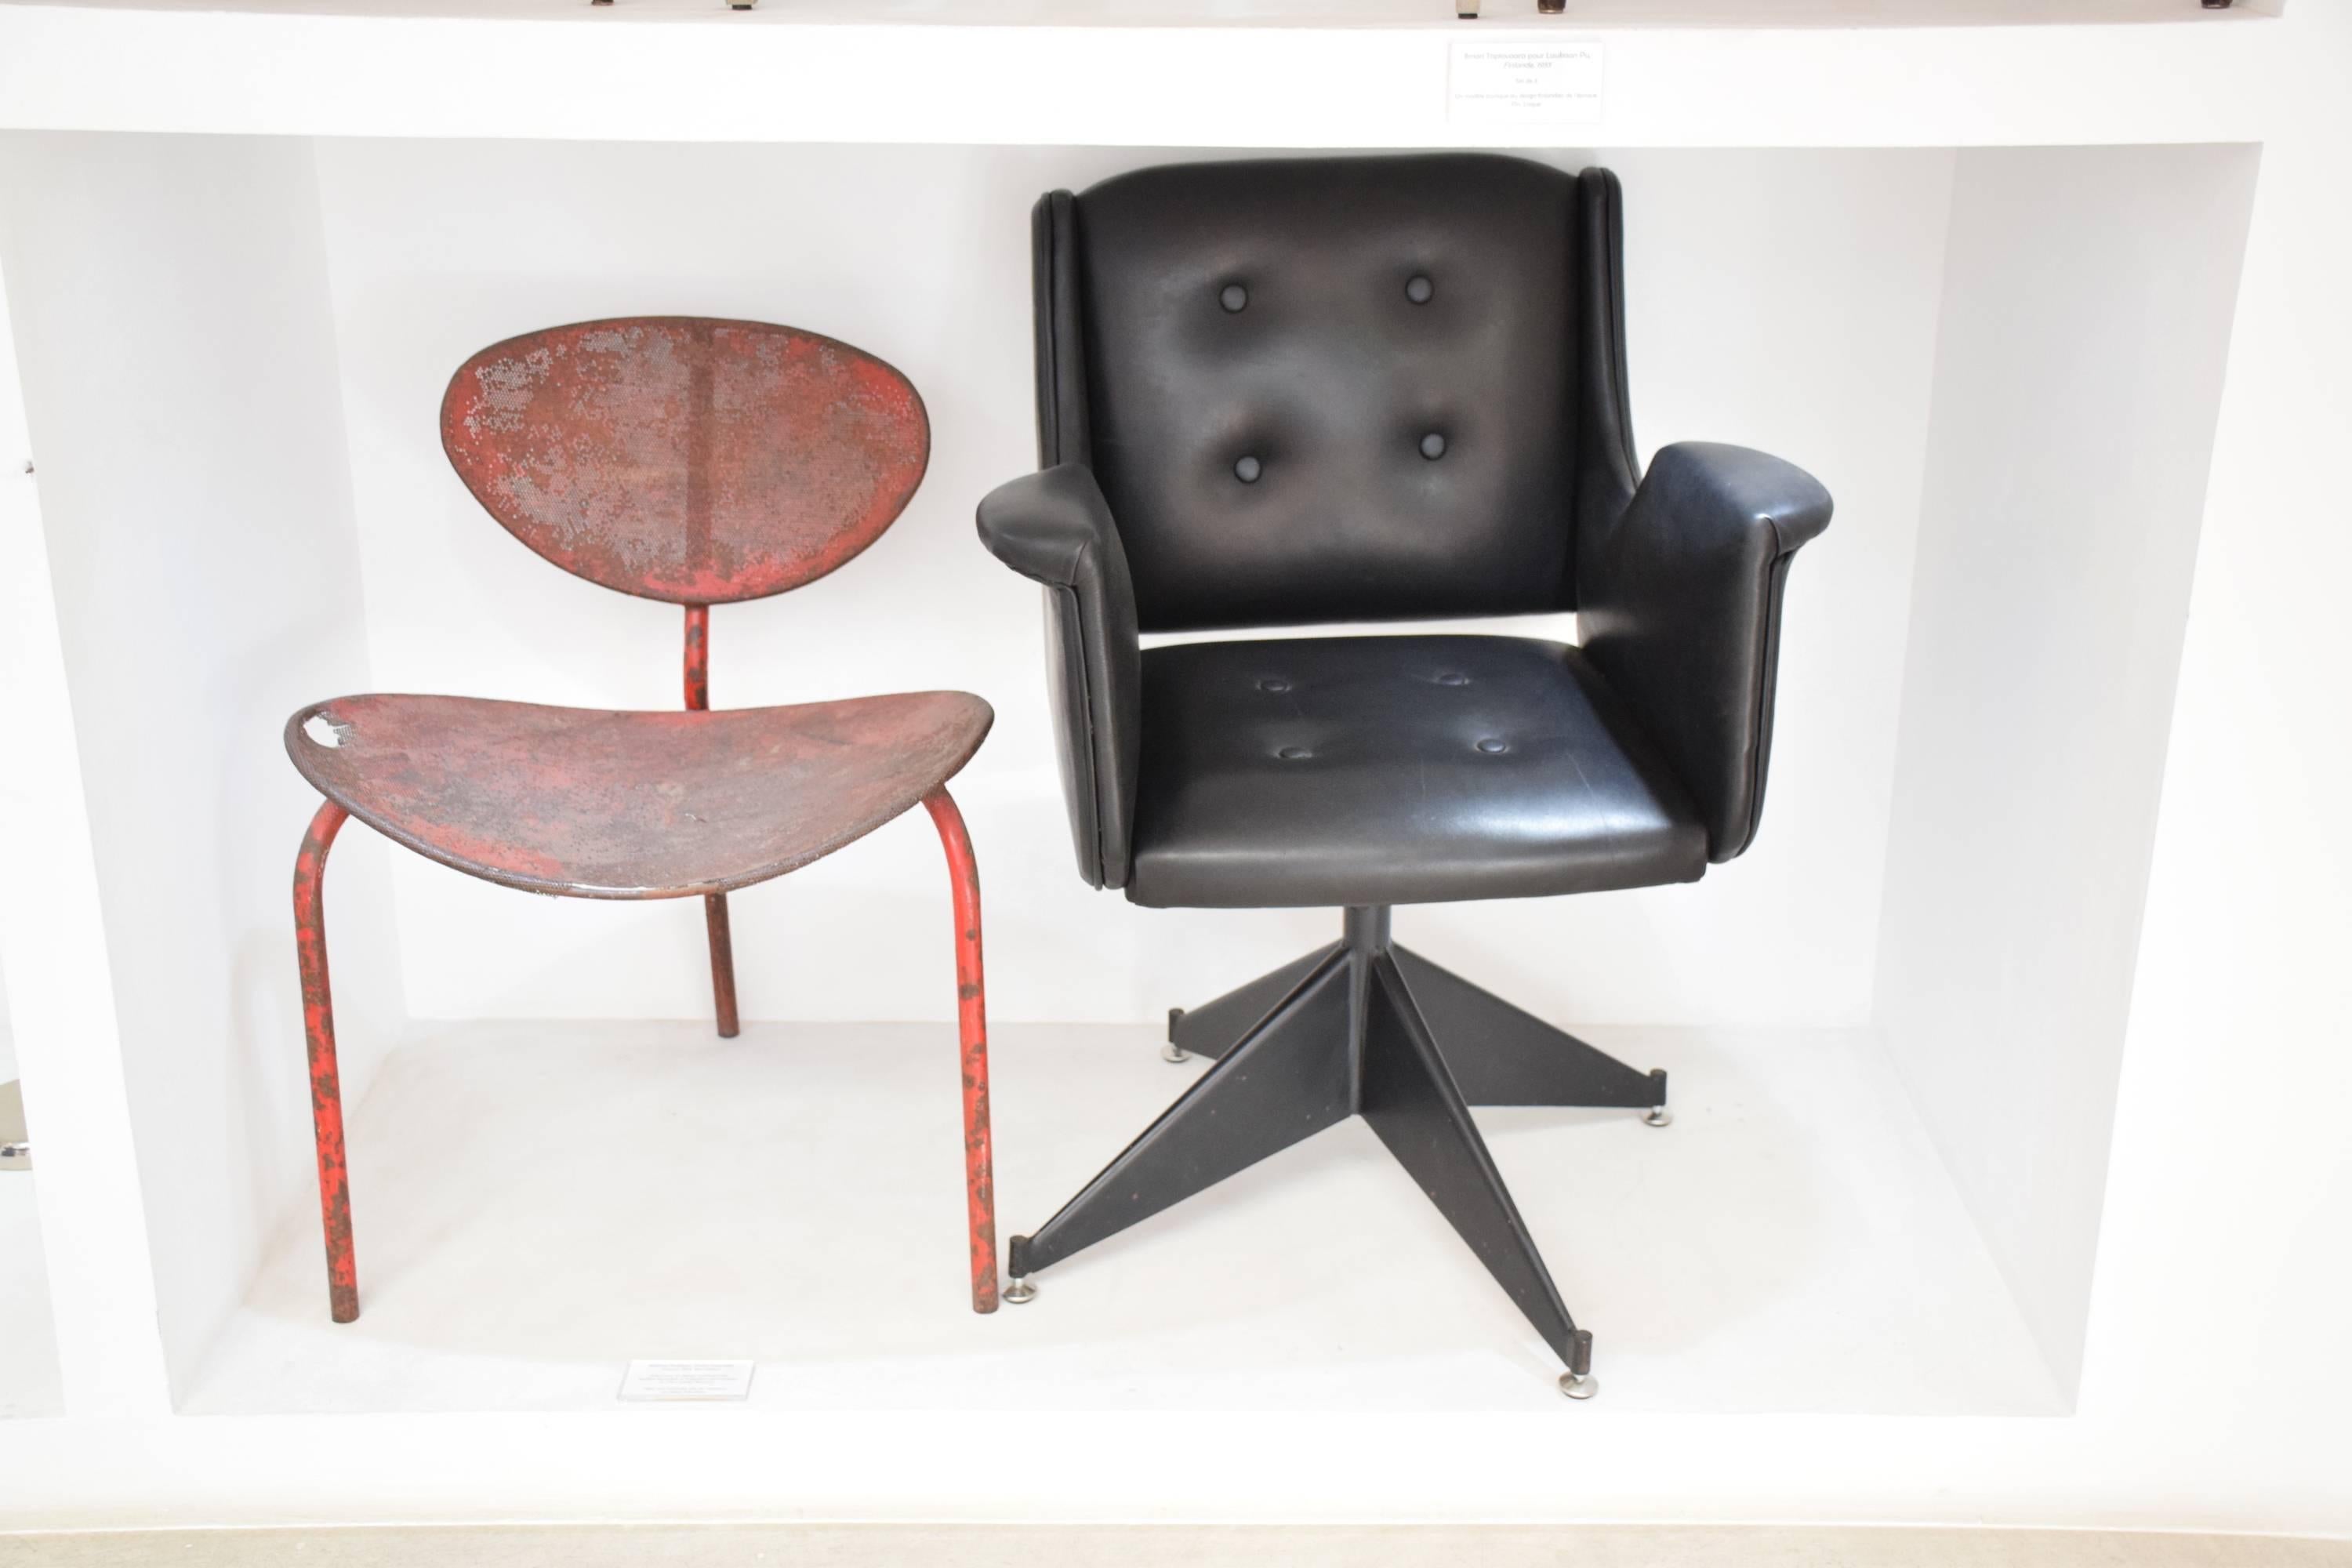 Beautiful pair of 1940s-1950s Mid-Century Italian desk chairs with metal swivel base and armrests expertly restored by our artisans with Italian black leather.